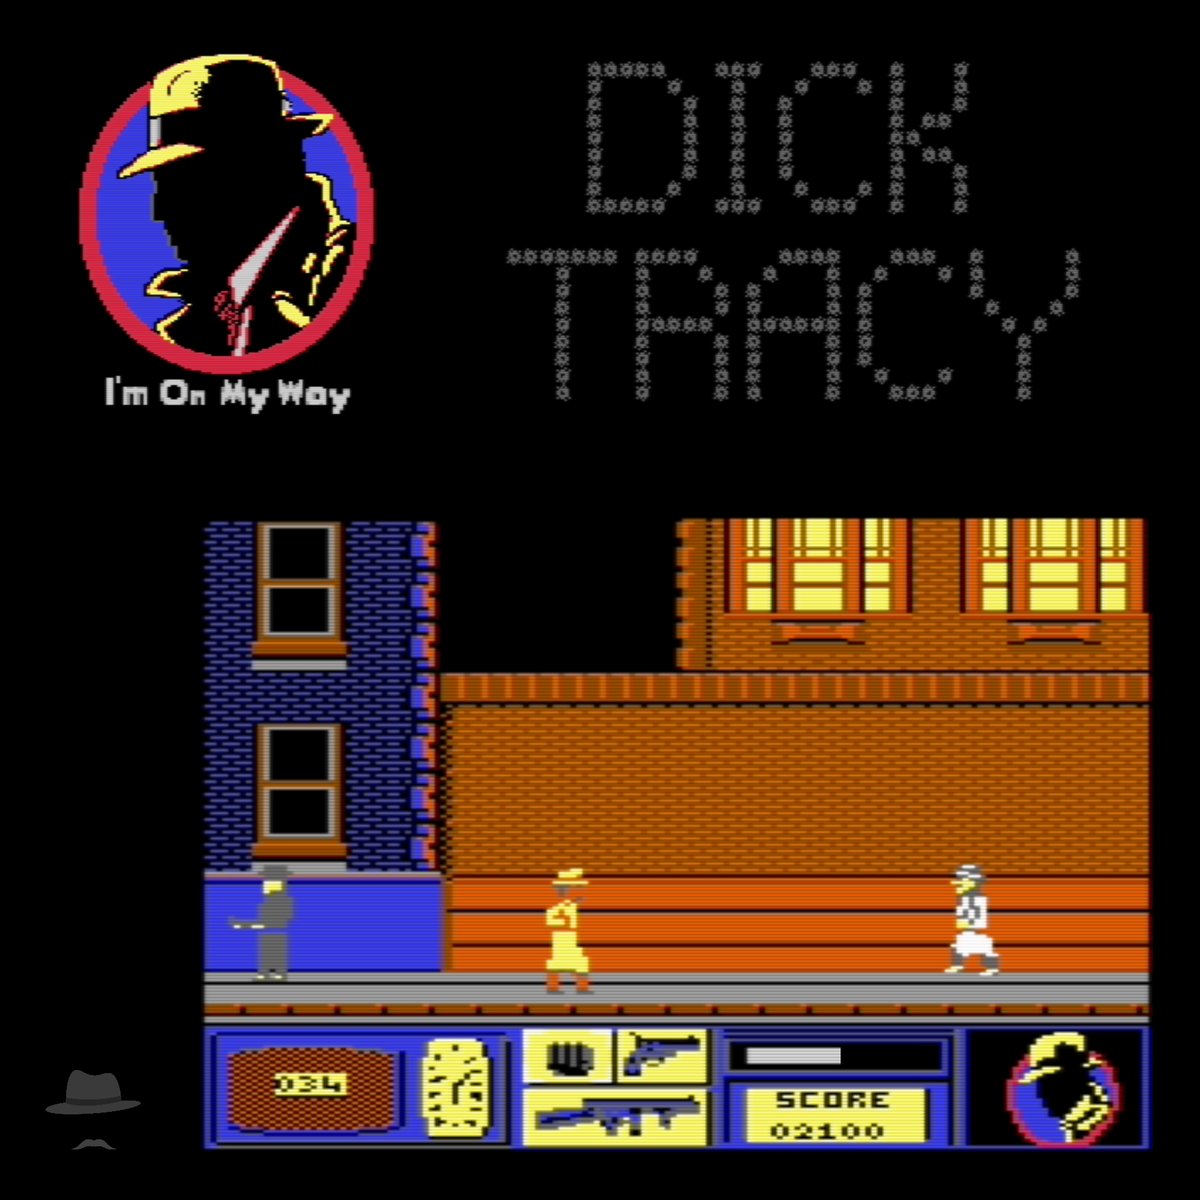 #DickTracy has got to be one of the worst games for the #C64. It is not even finished. If you load the game up and use a #Cartridge to rummage in the memory, you will see a lot of unused #Sprites and unfinished code... #Retro #RetroComputer #RetroGaming #RetroGame #Commodore64